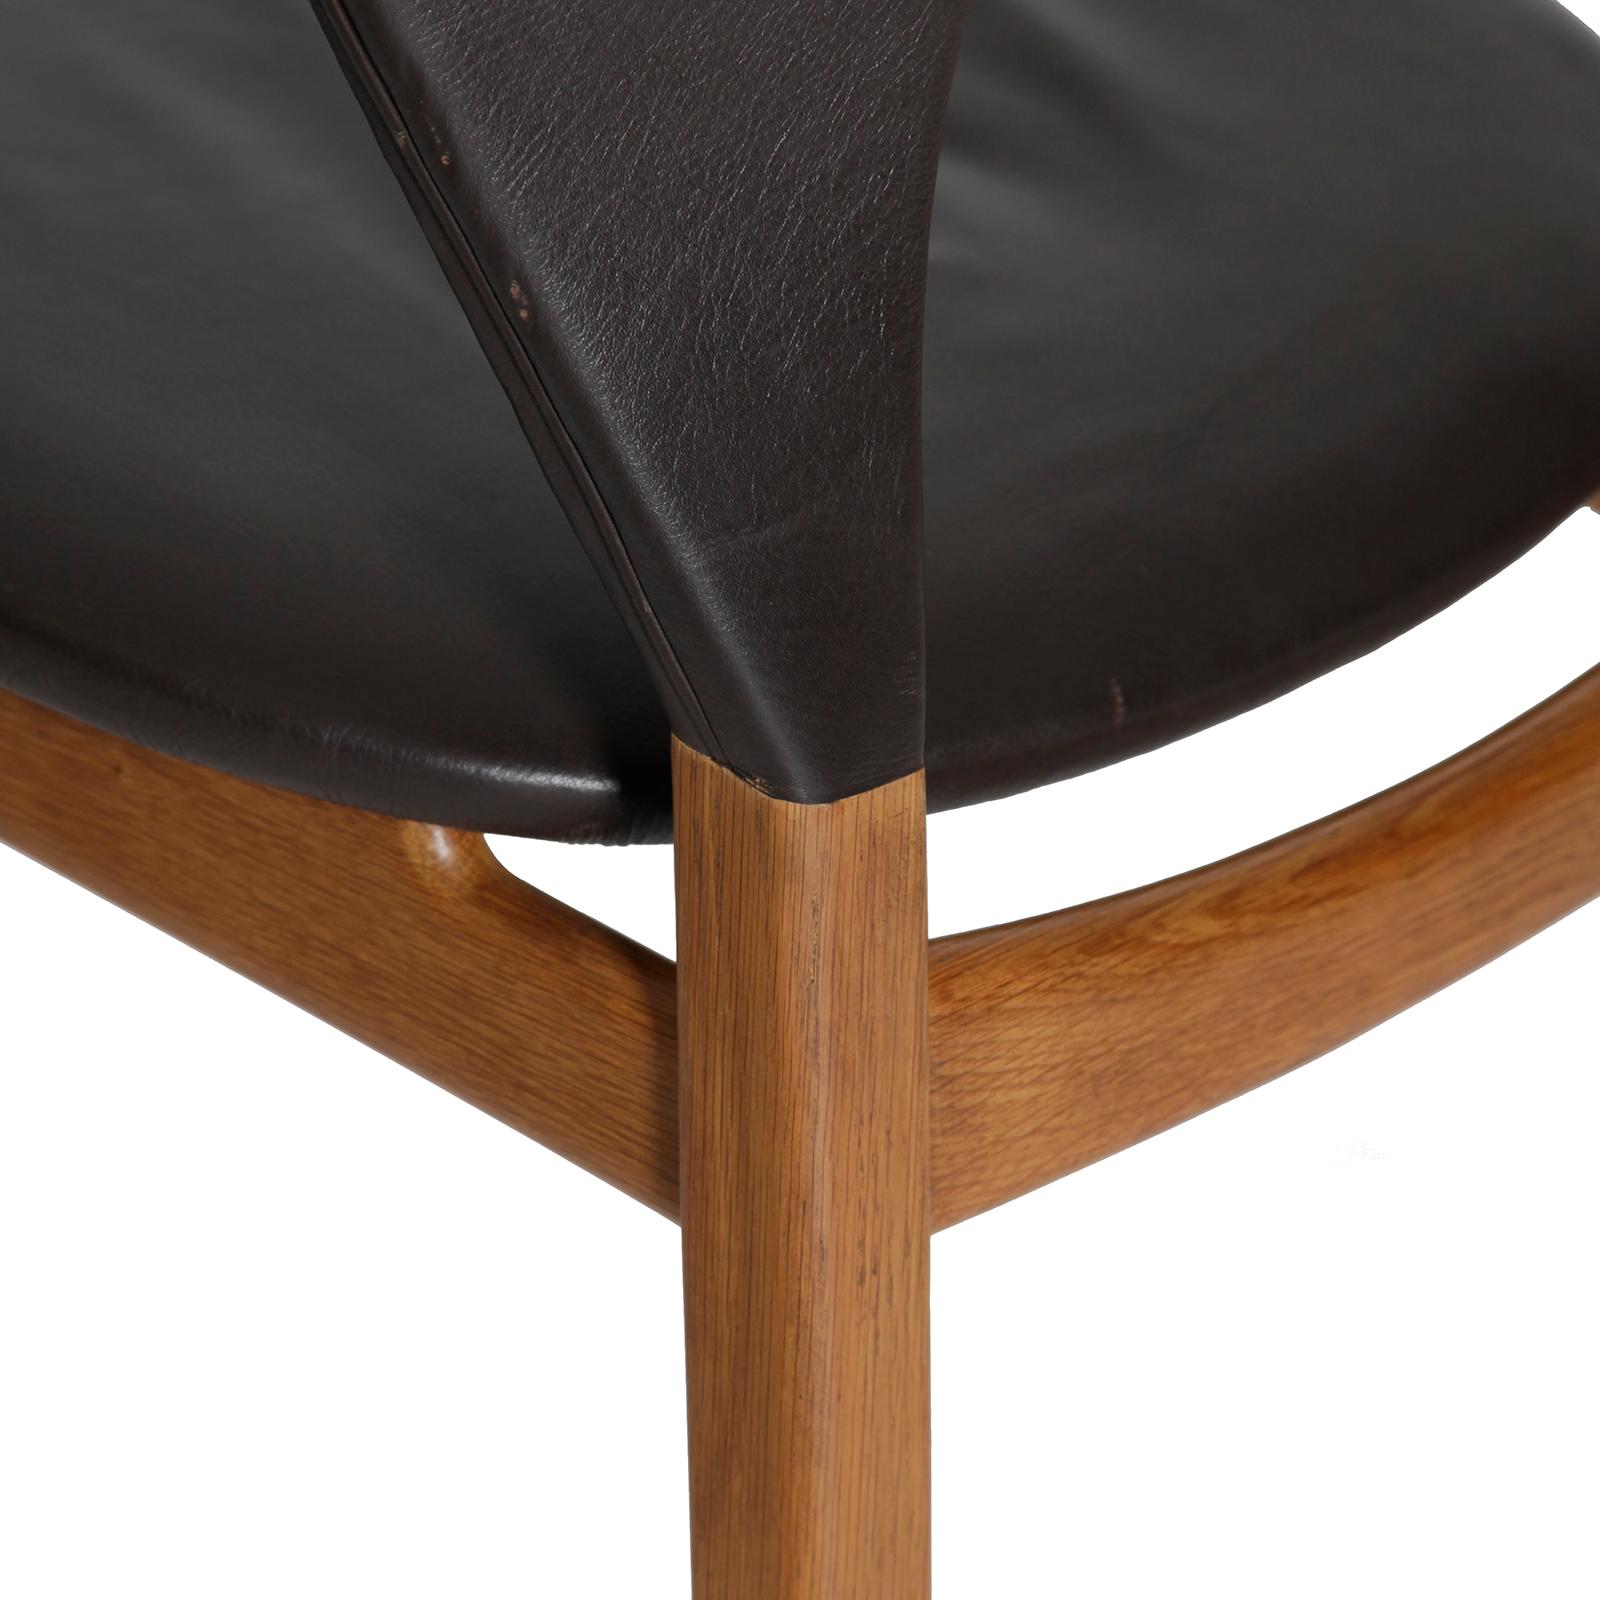 20th Century Danish Side Chair in Oak and Leather by Tove & Edvard Kindt-Larsen For Sale